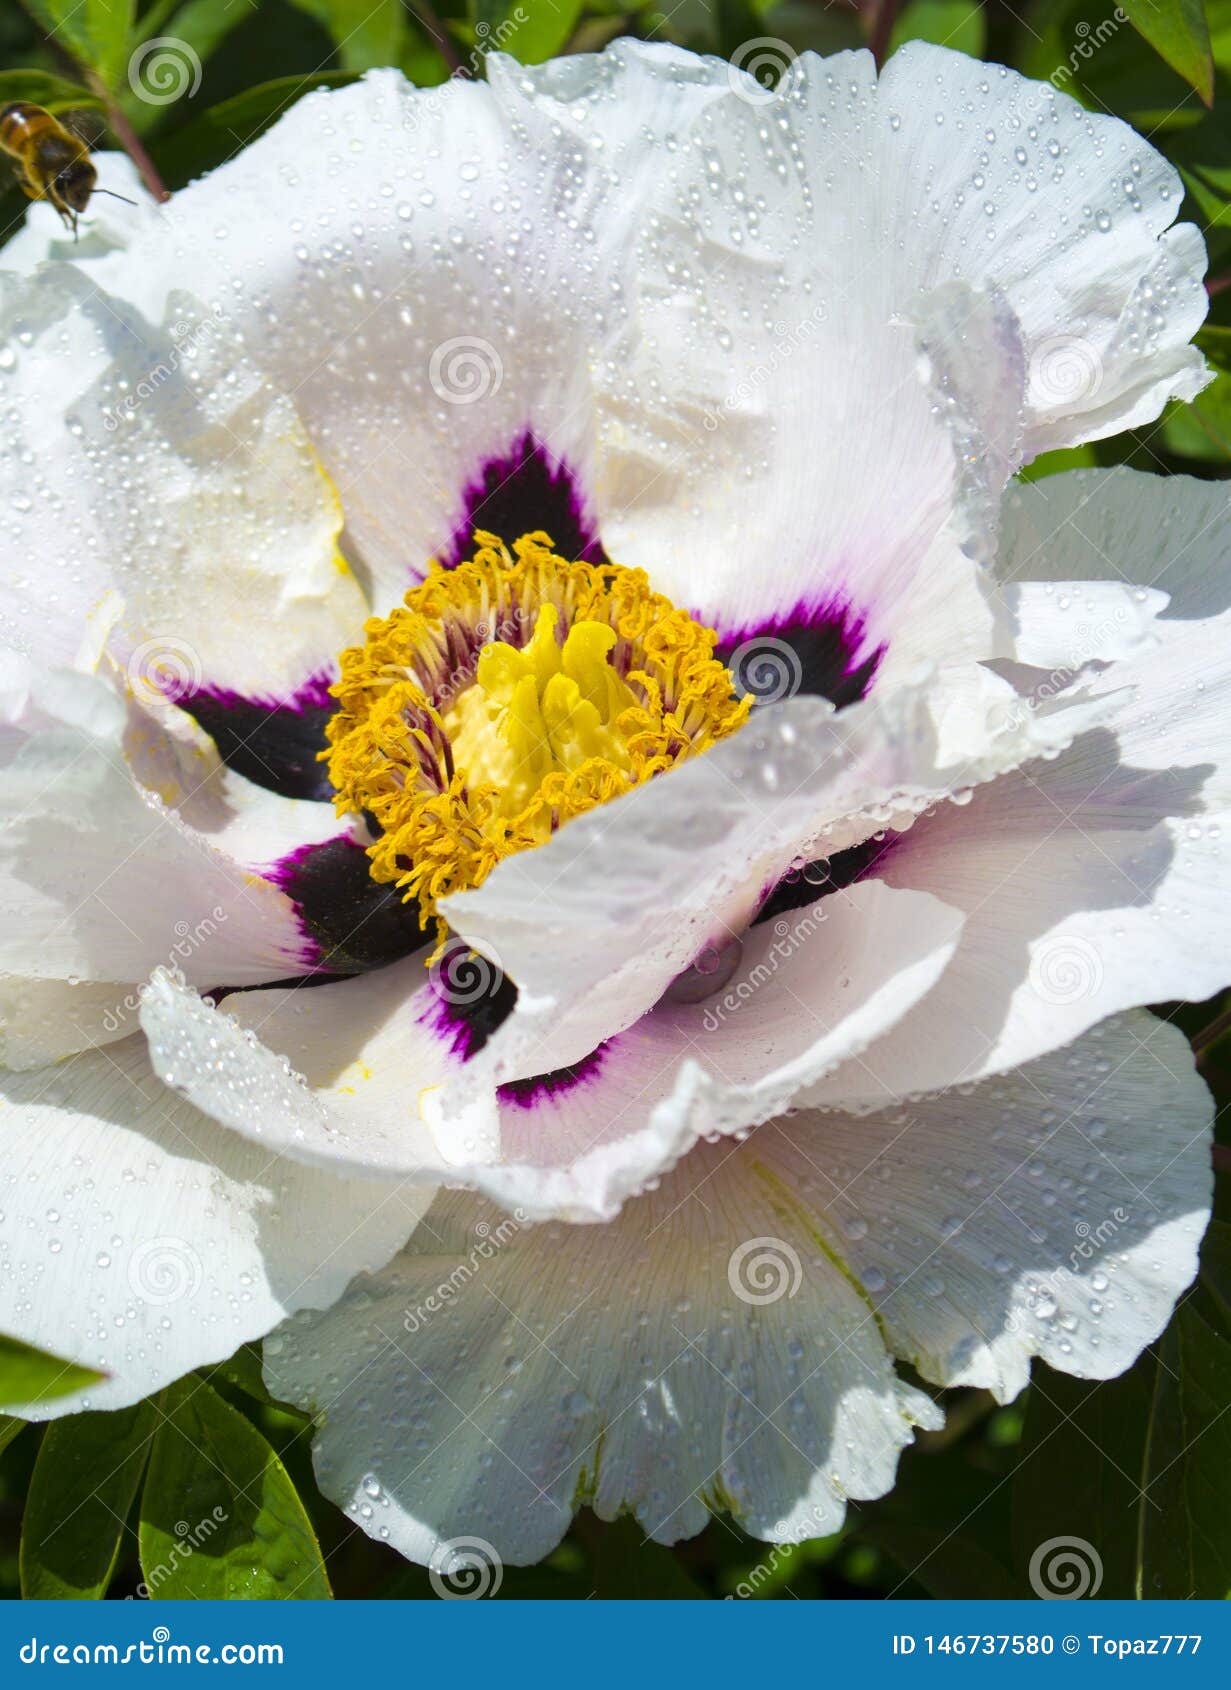  White  Peony Flower  With Dew  Drops  Close Up Stock Photo 